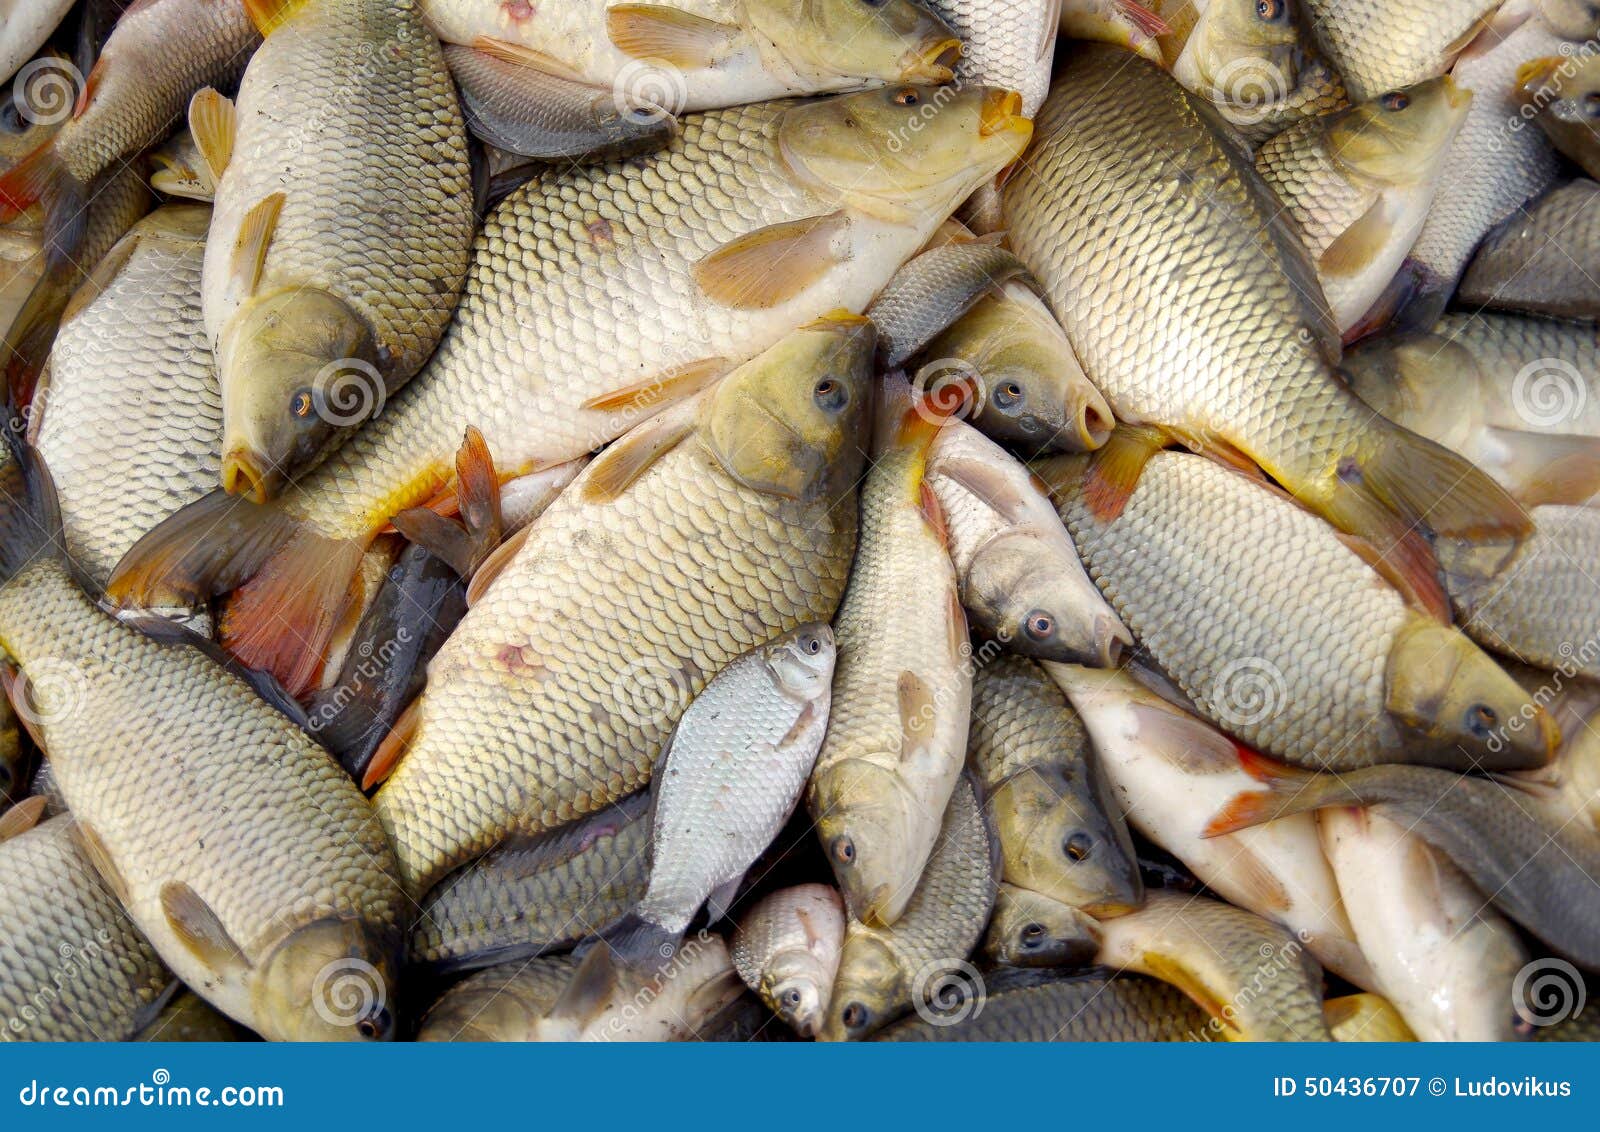 Harvesting of Fish in the Pond Stock Image - Image of animals, harvest:  50436707